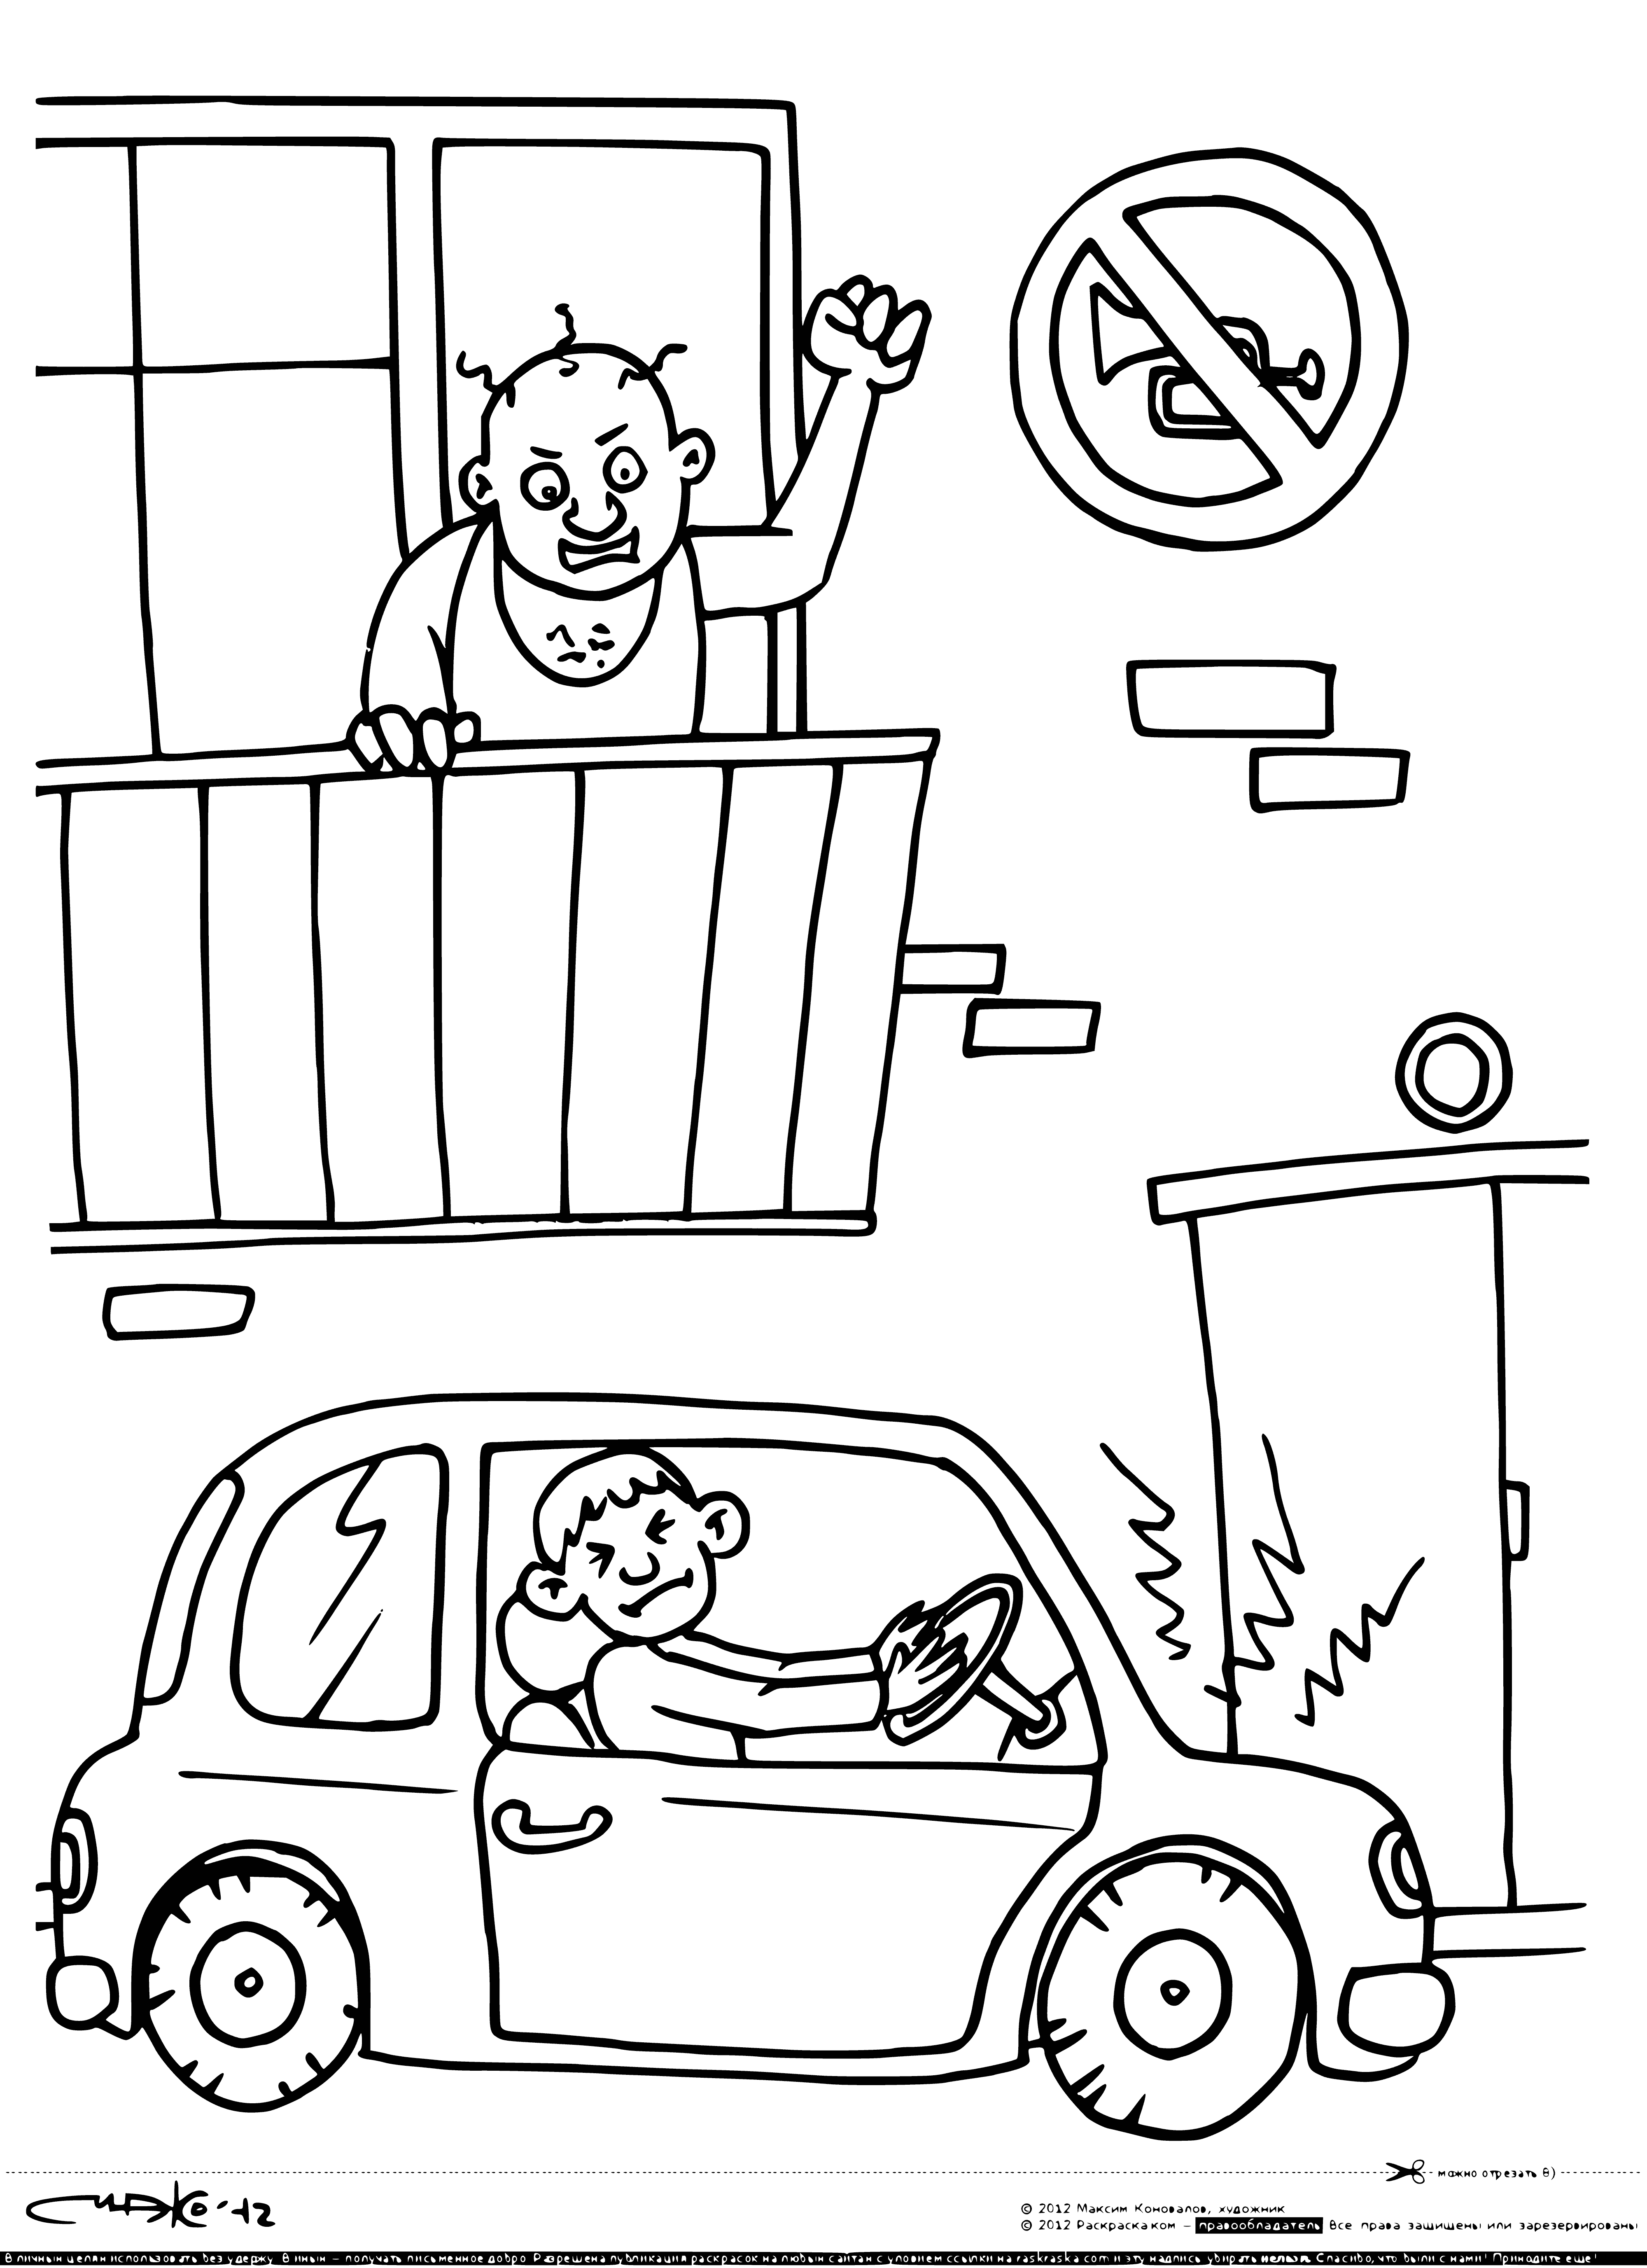 Traffic rules coloring page